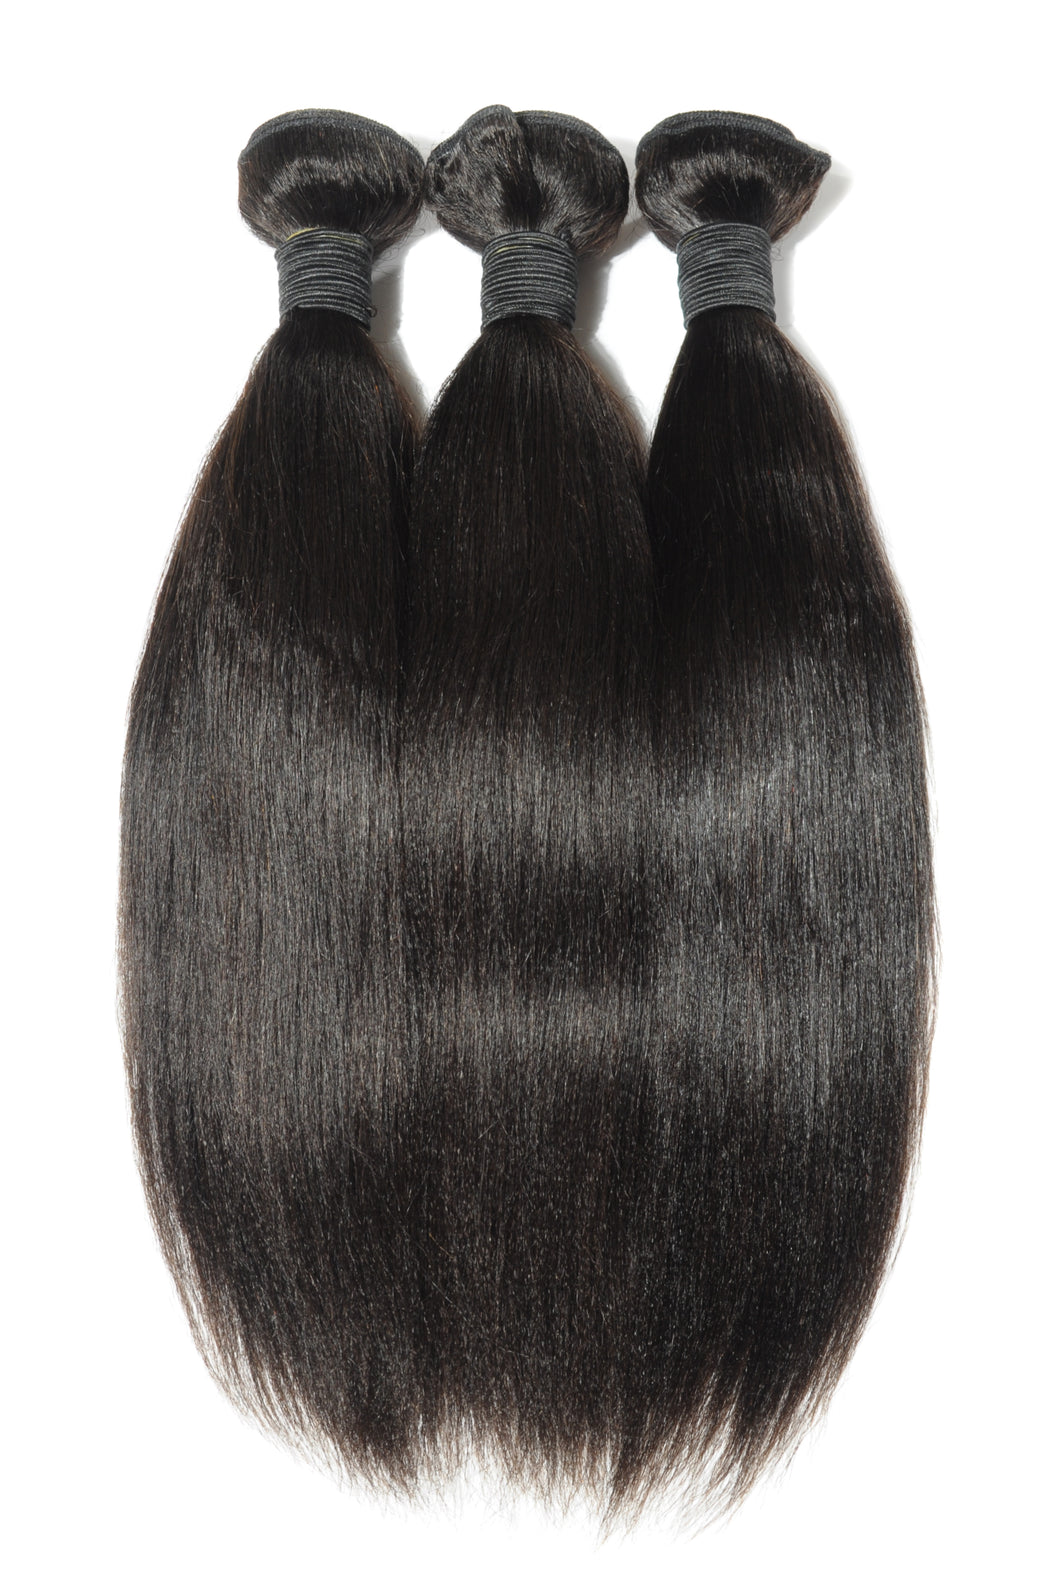 LE'CHIC PURE STRAIGHT - Lechicpureextentions